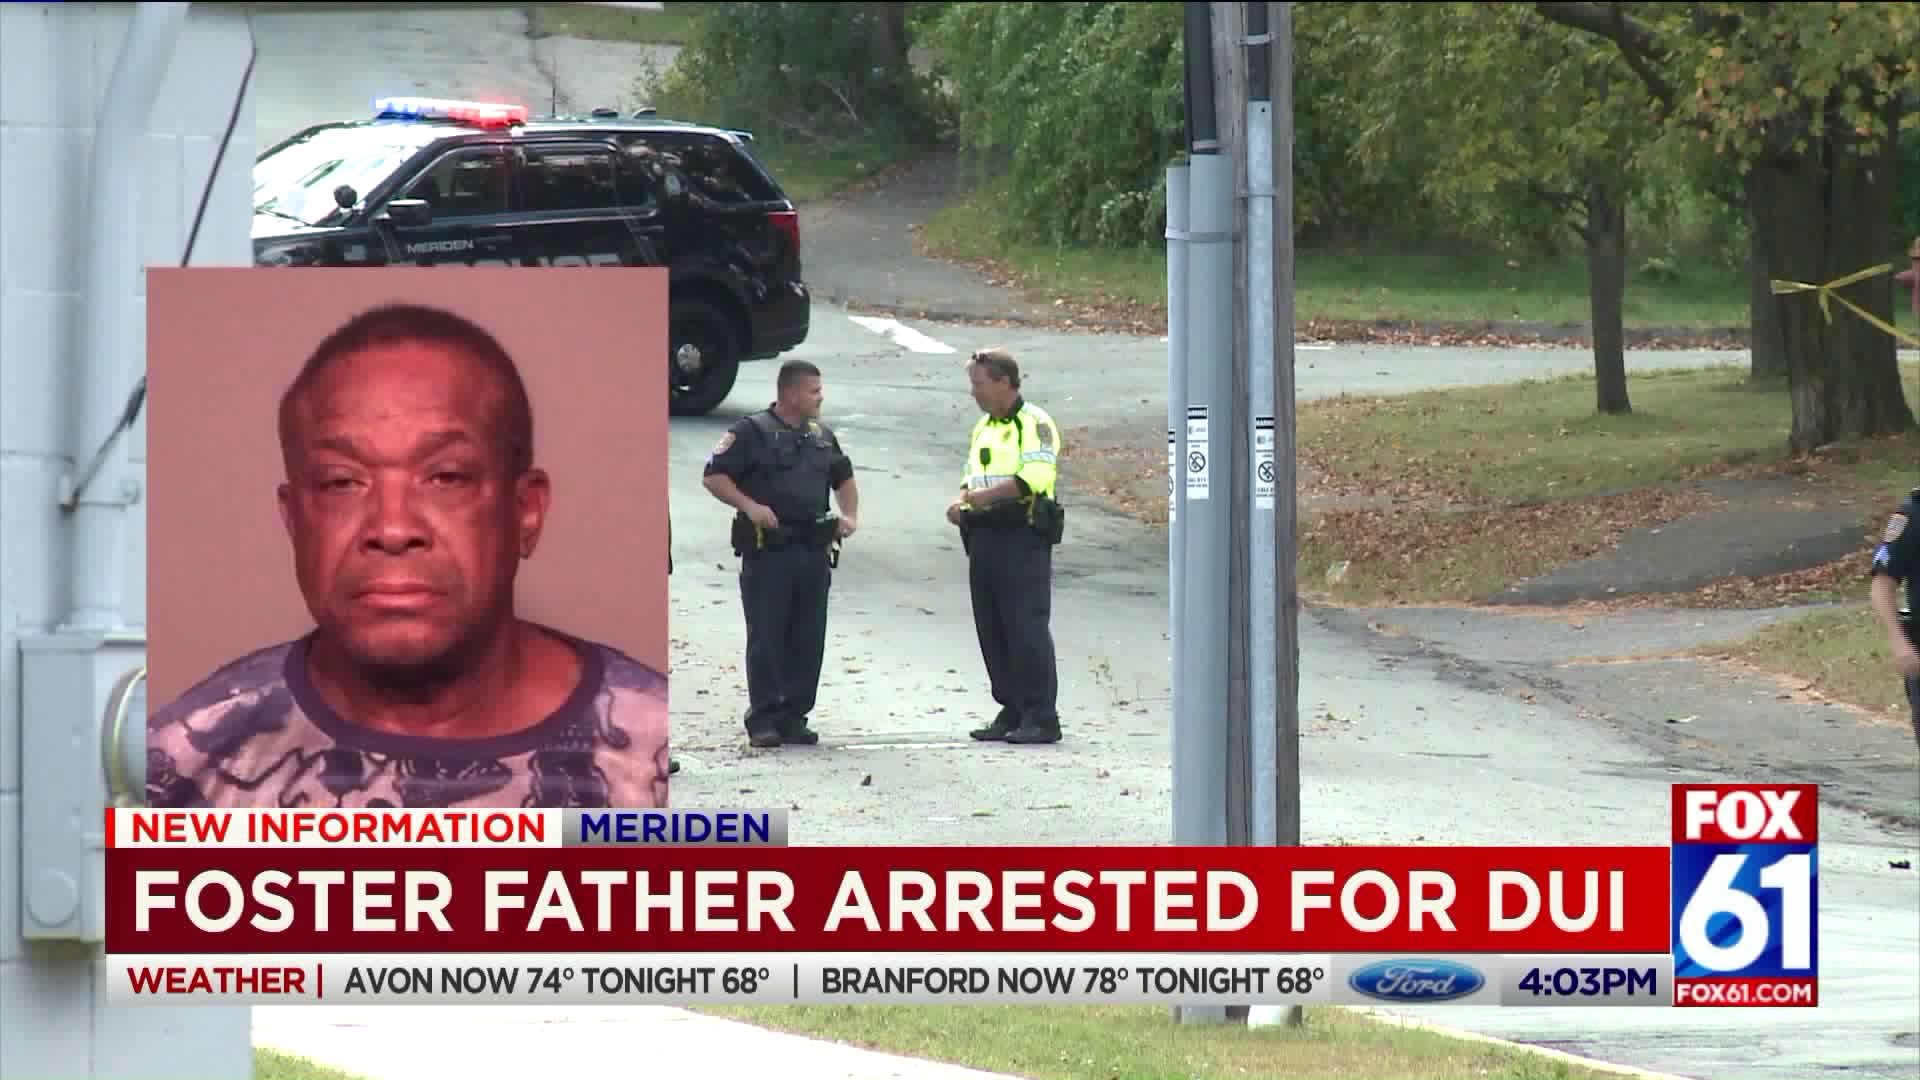 Foster father arrested for DUI in serious crash